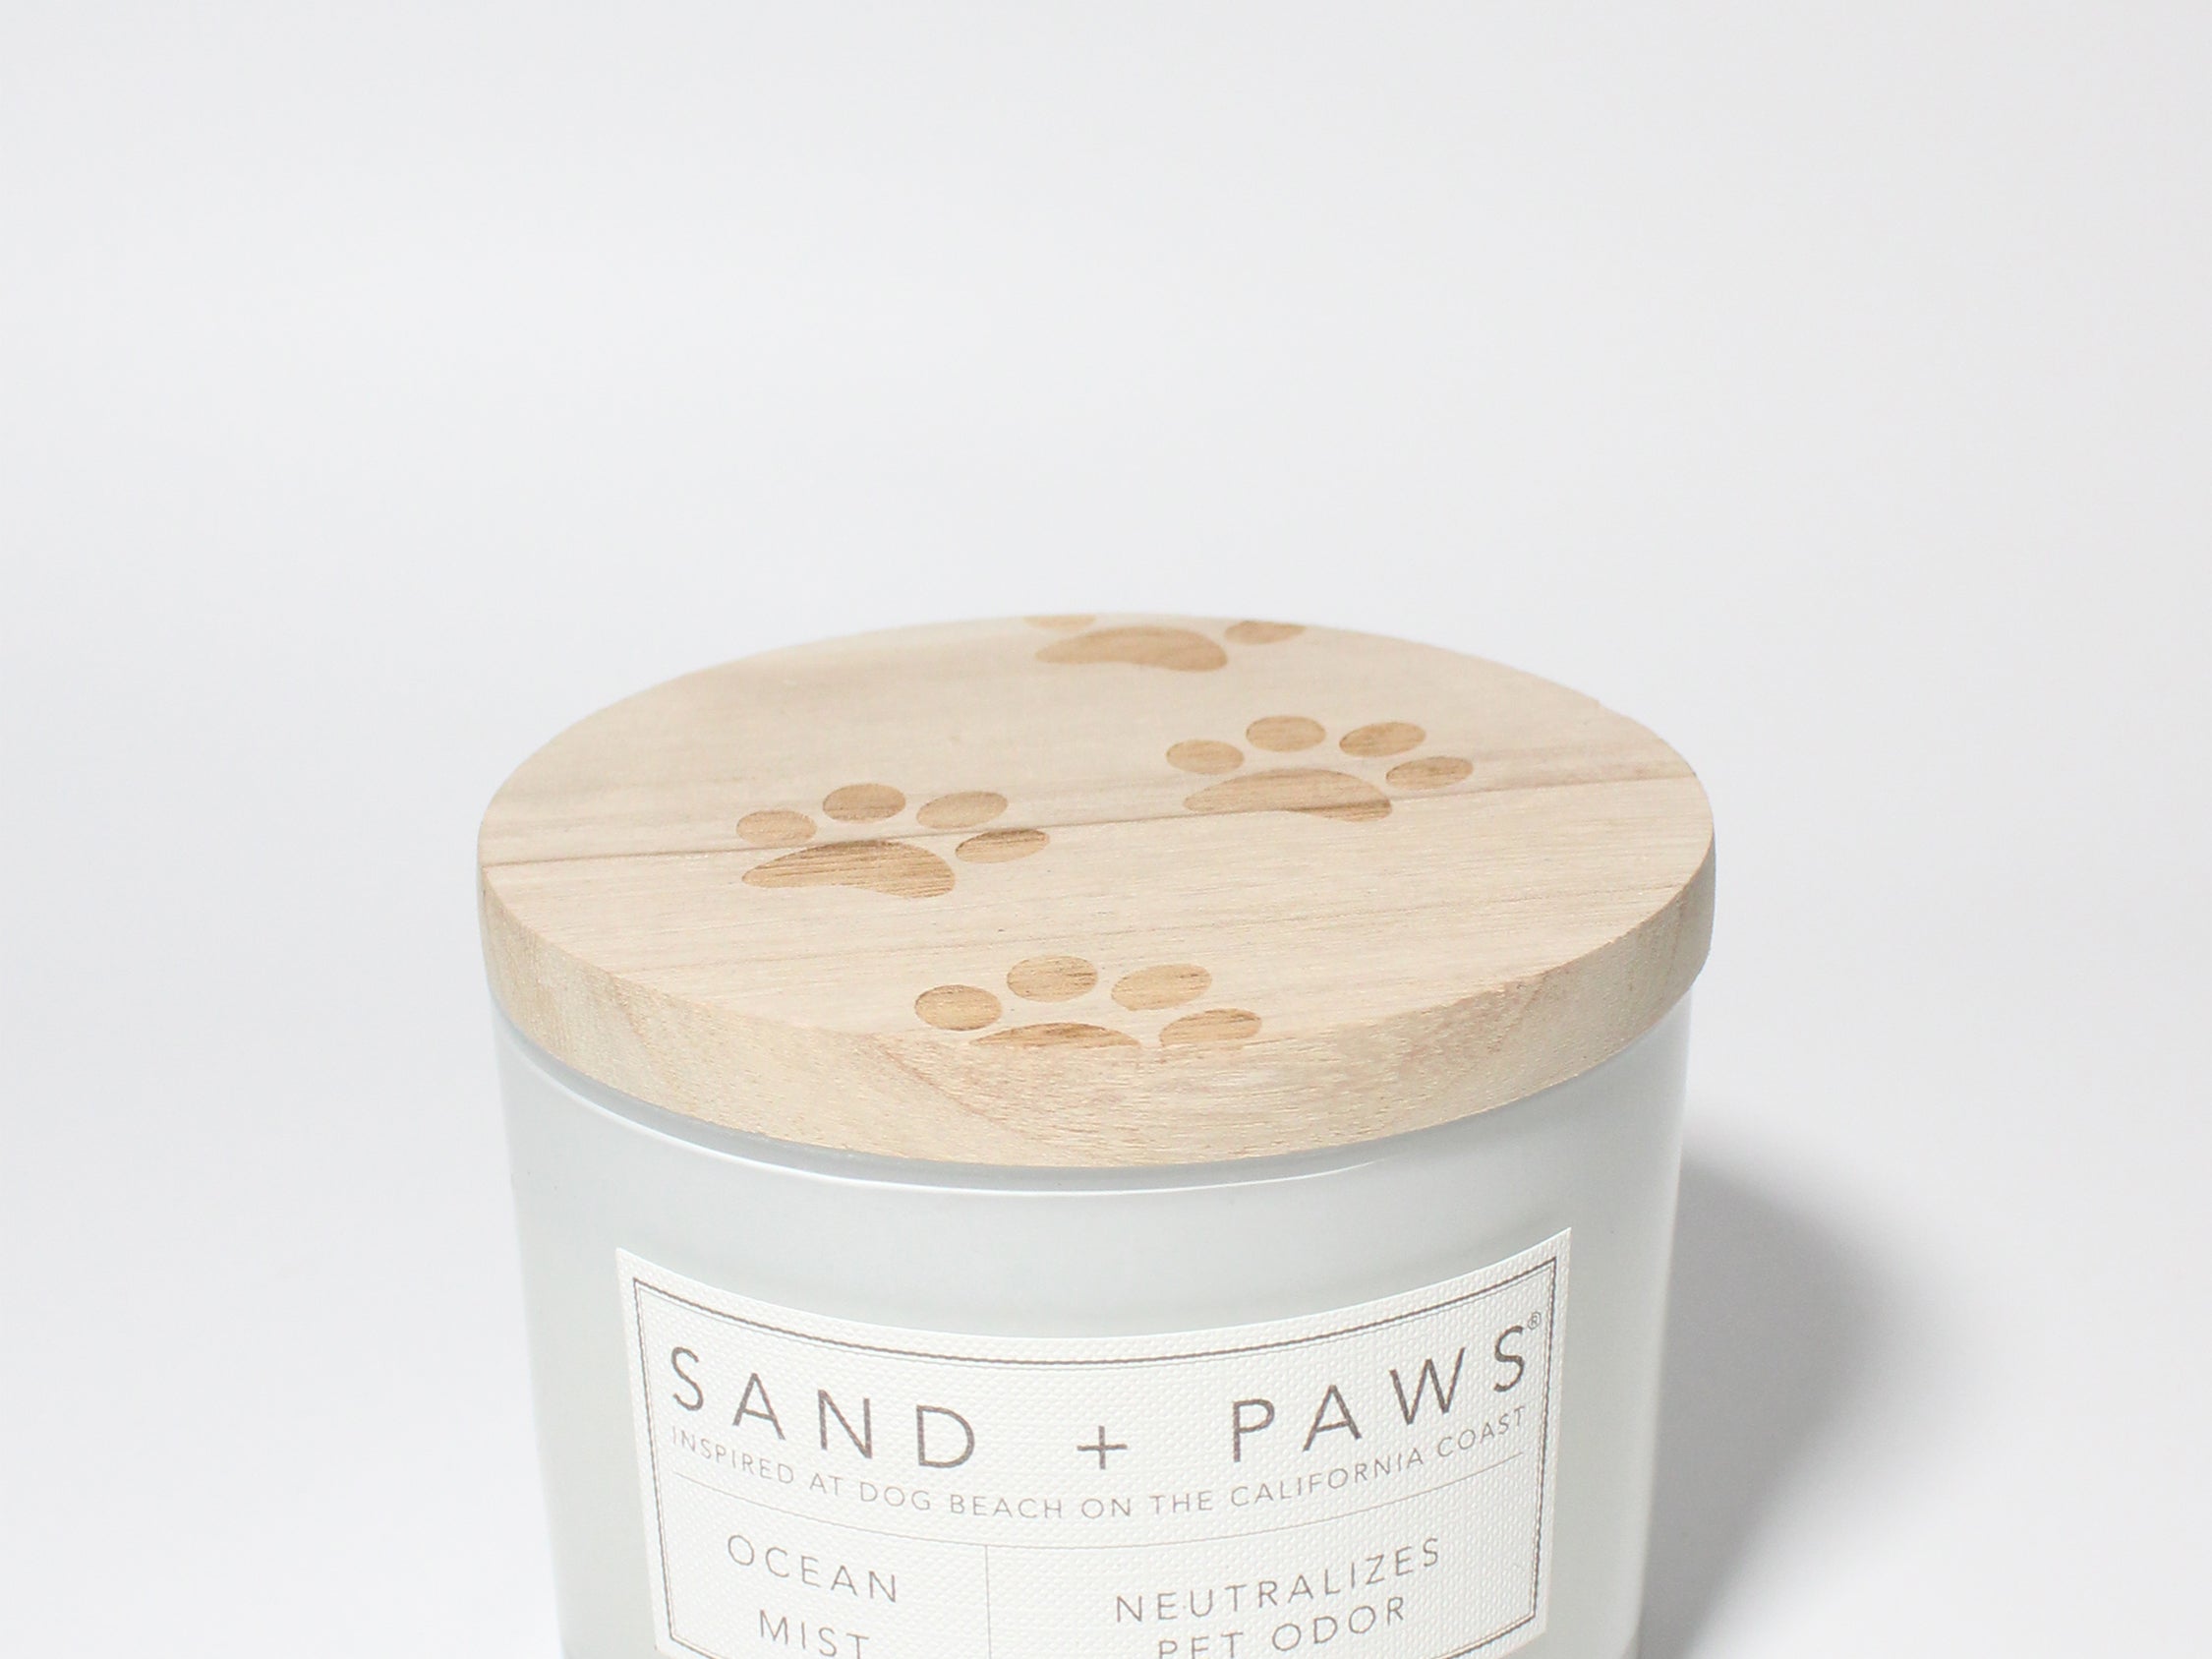 Sand + Paws Ocean Mist 12 oz scented candle White vessel with Carved Paw Print lid